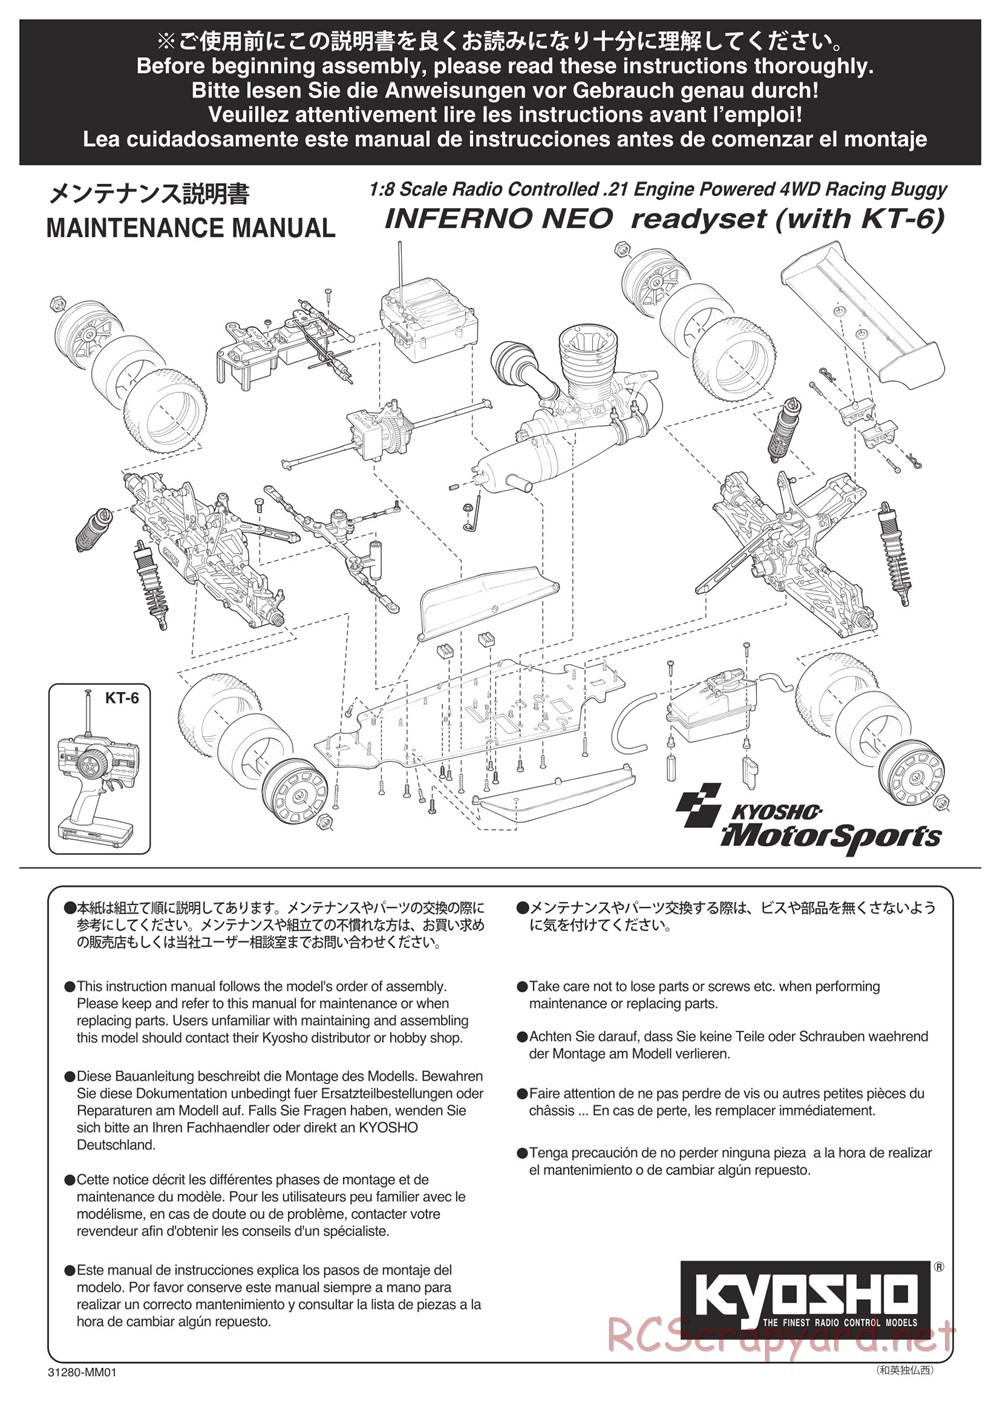 Kyosho - Inferno Neo - Manual - Page 1